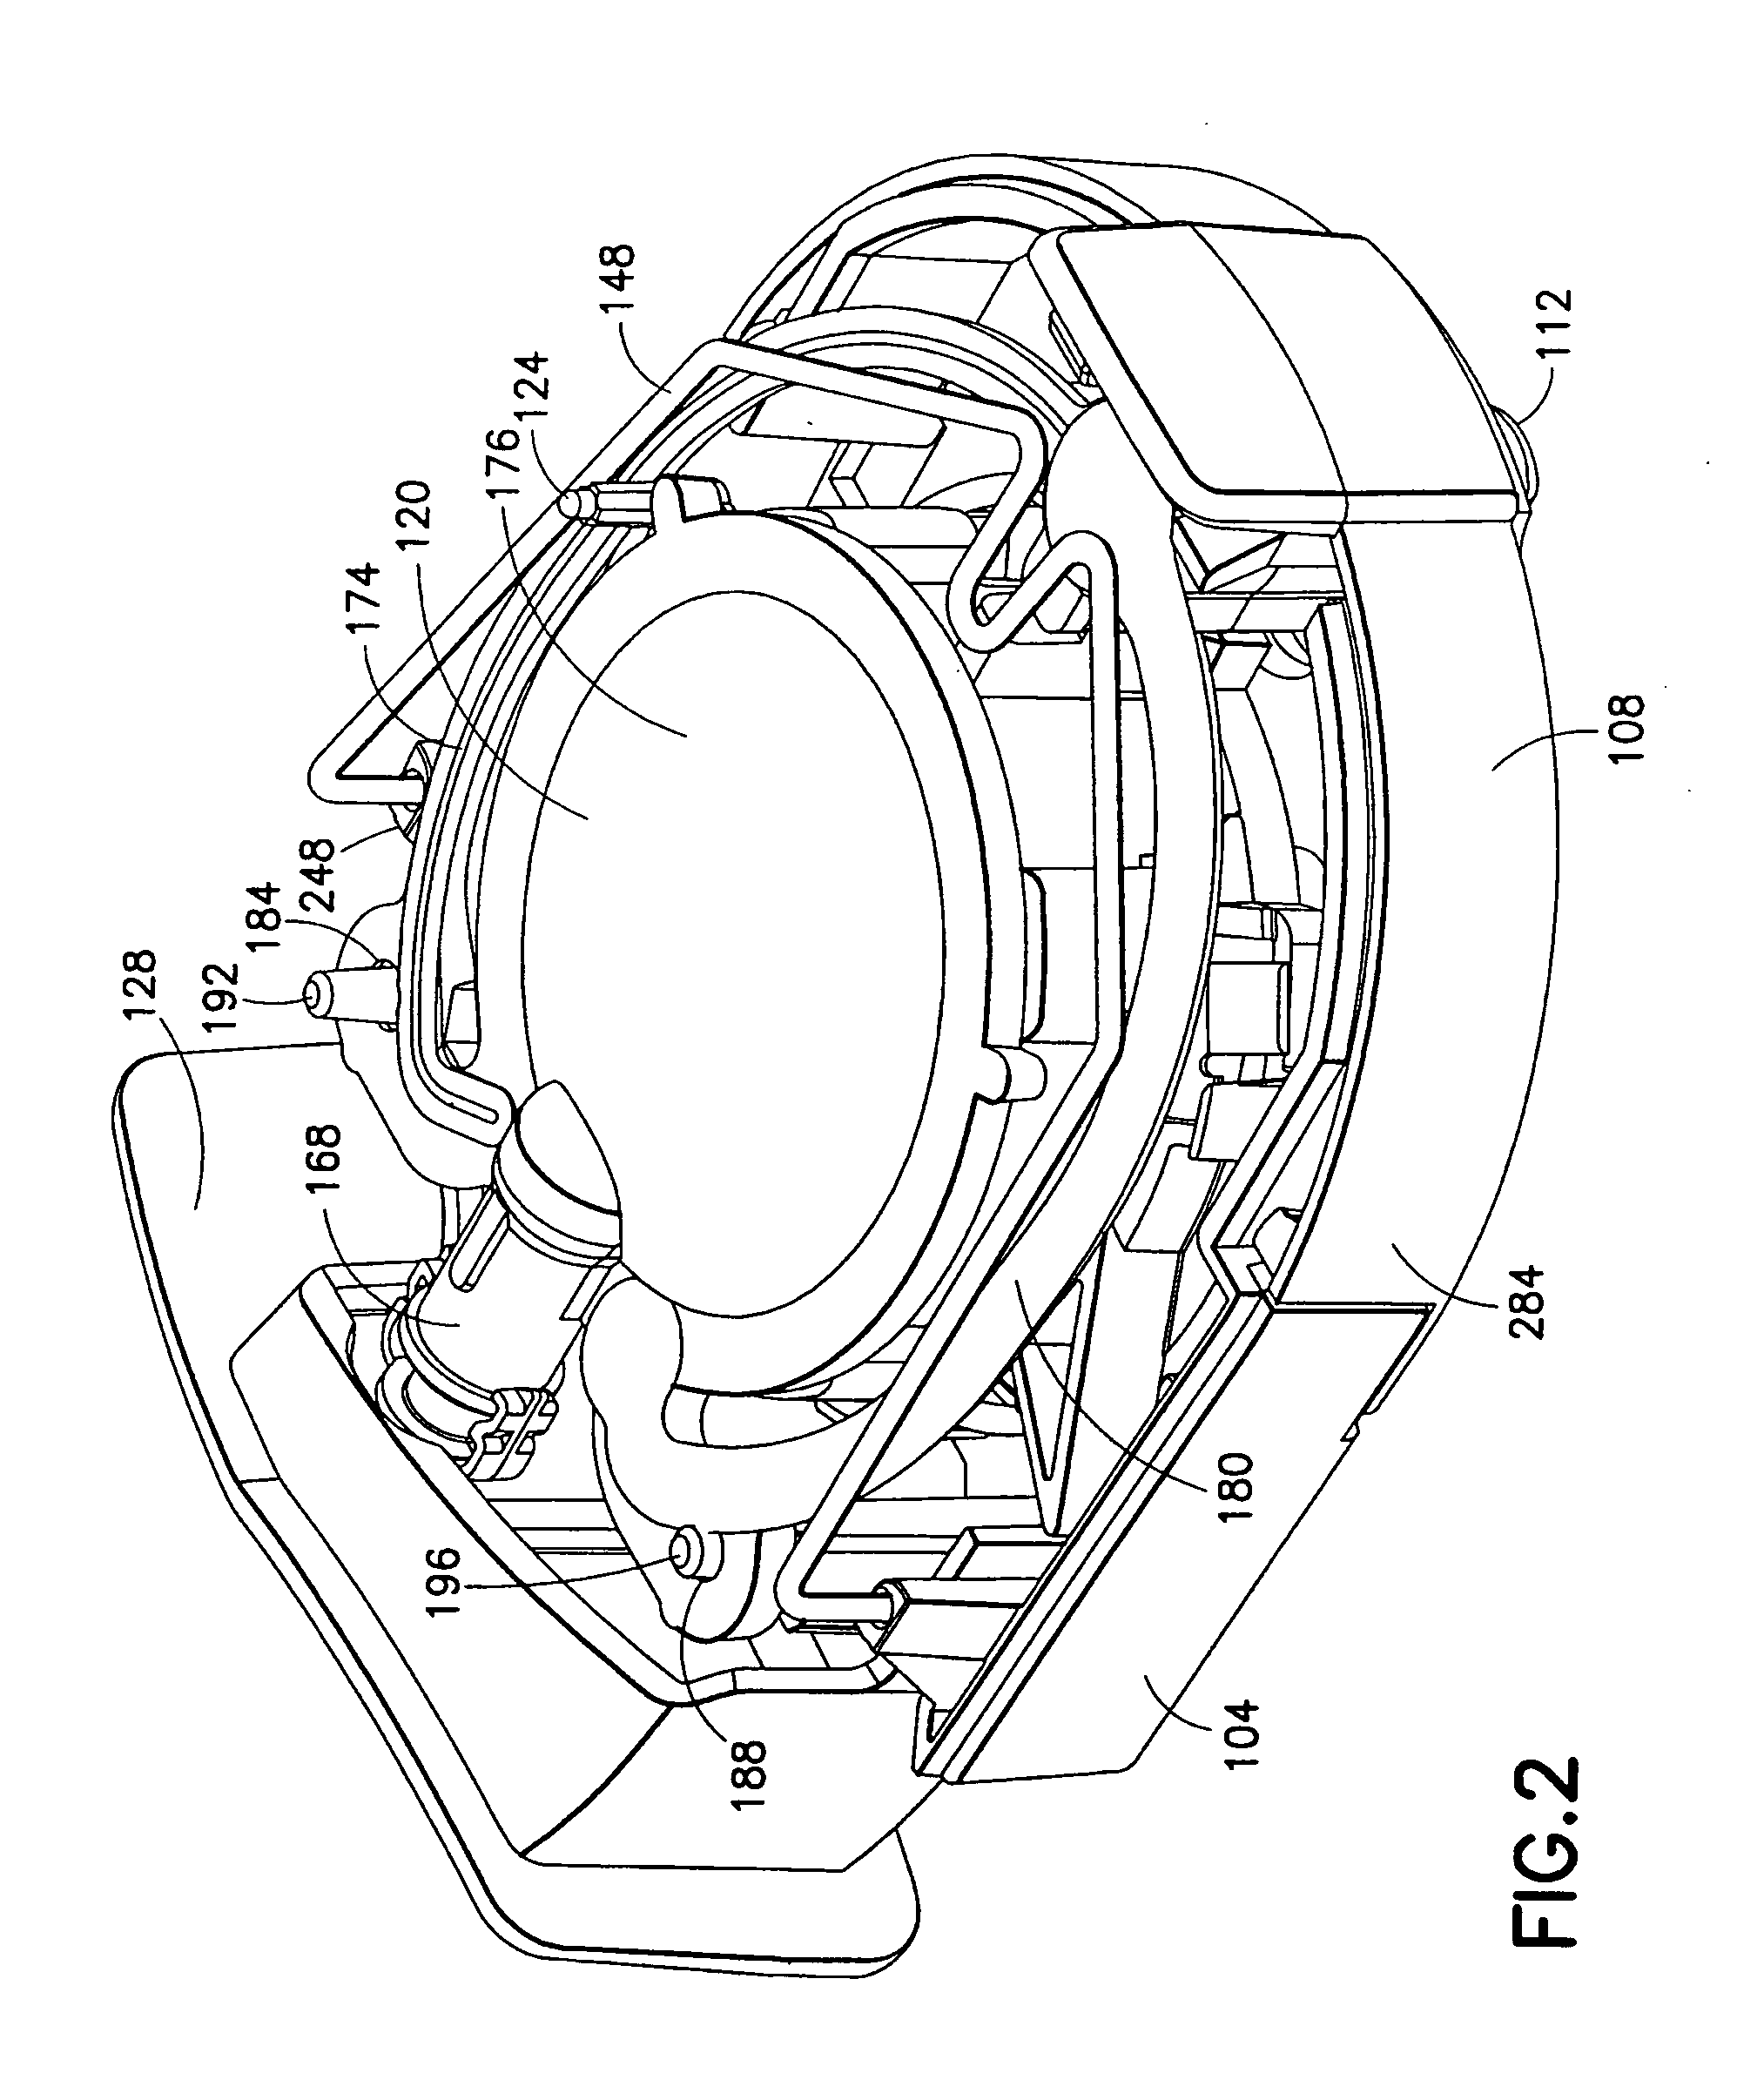 Self-injection device having needle cover with activation preventer